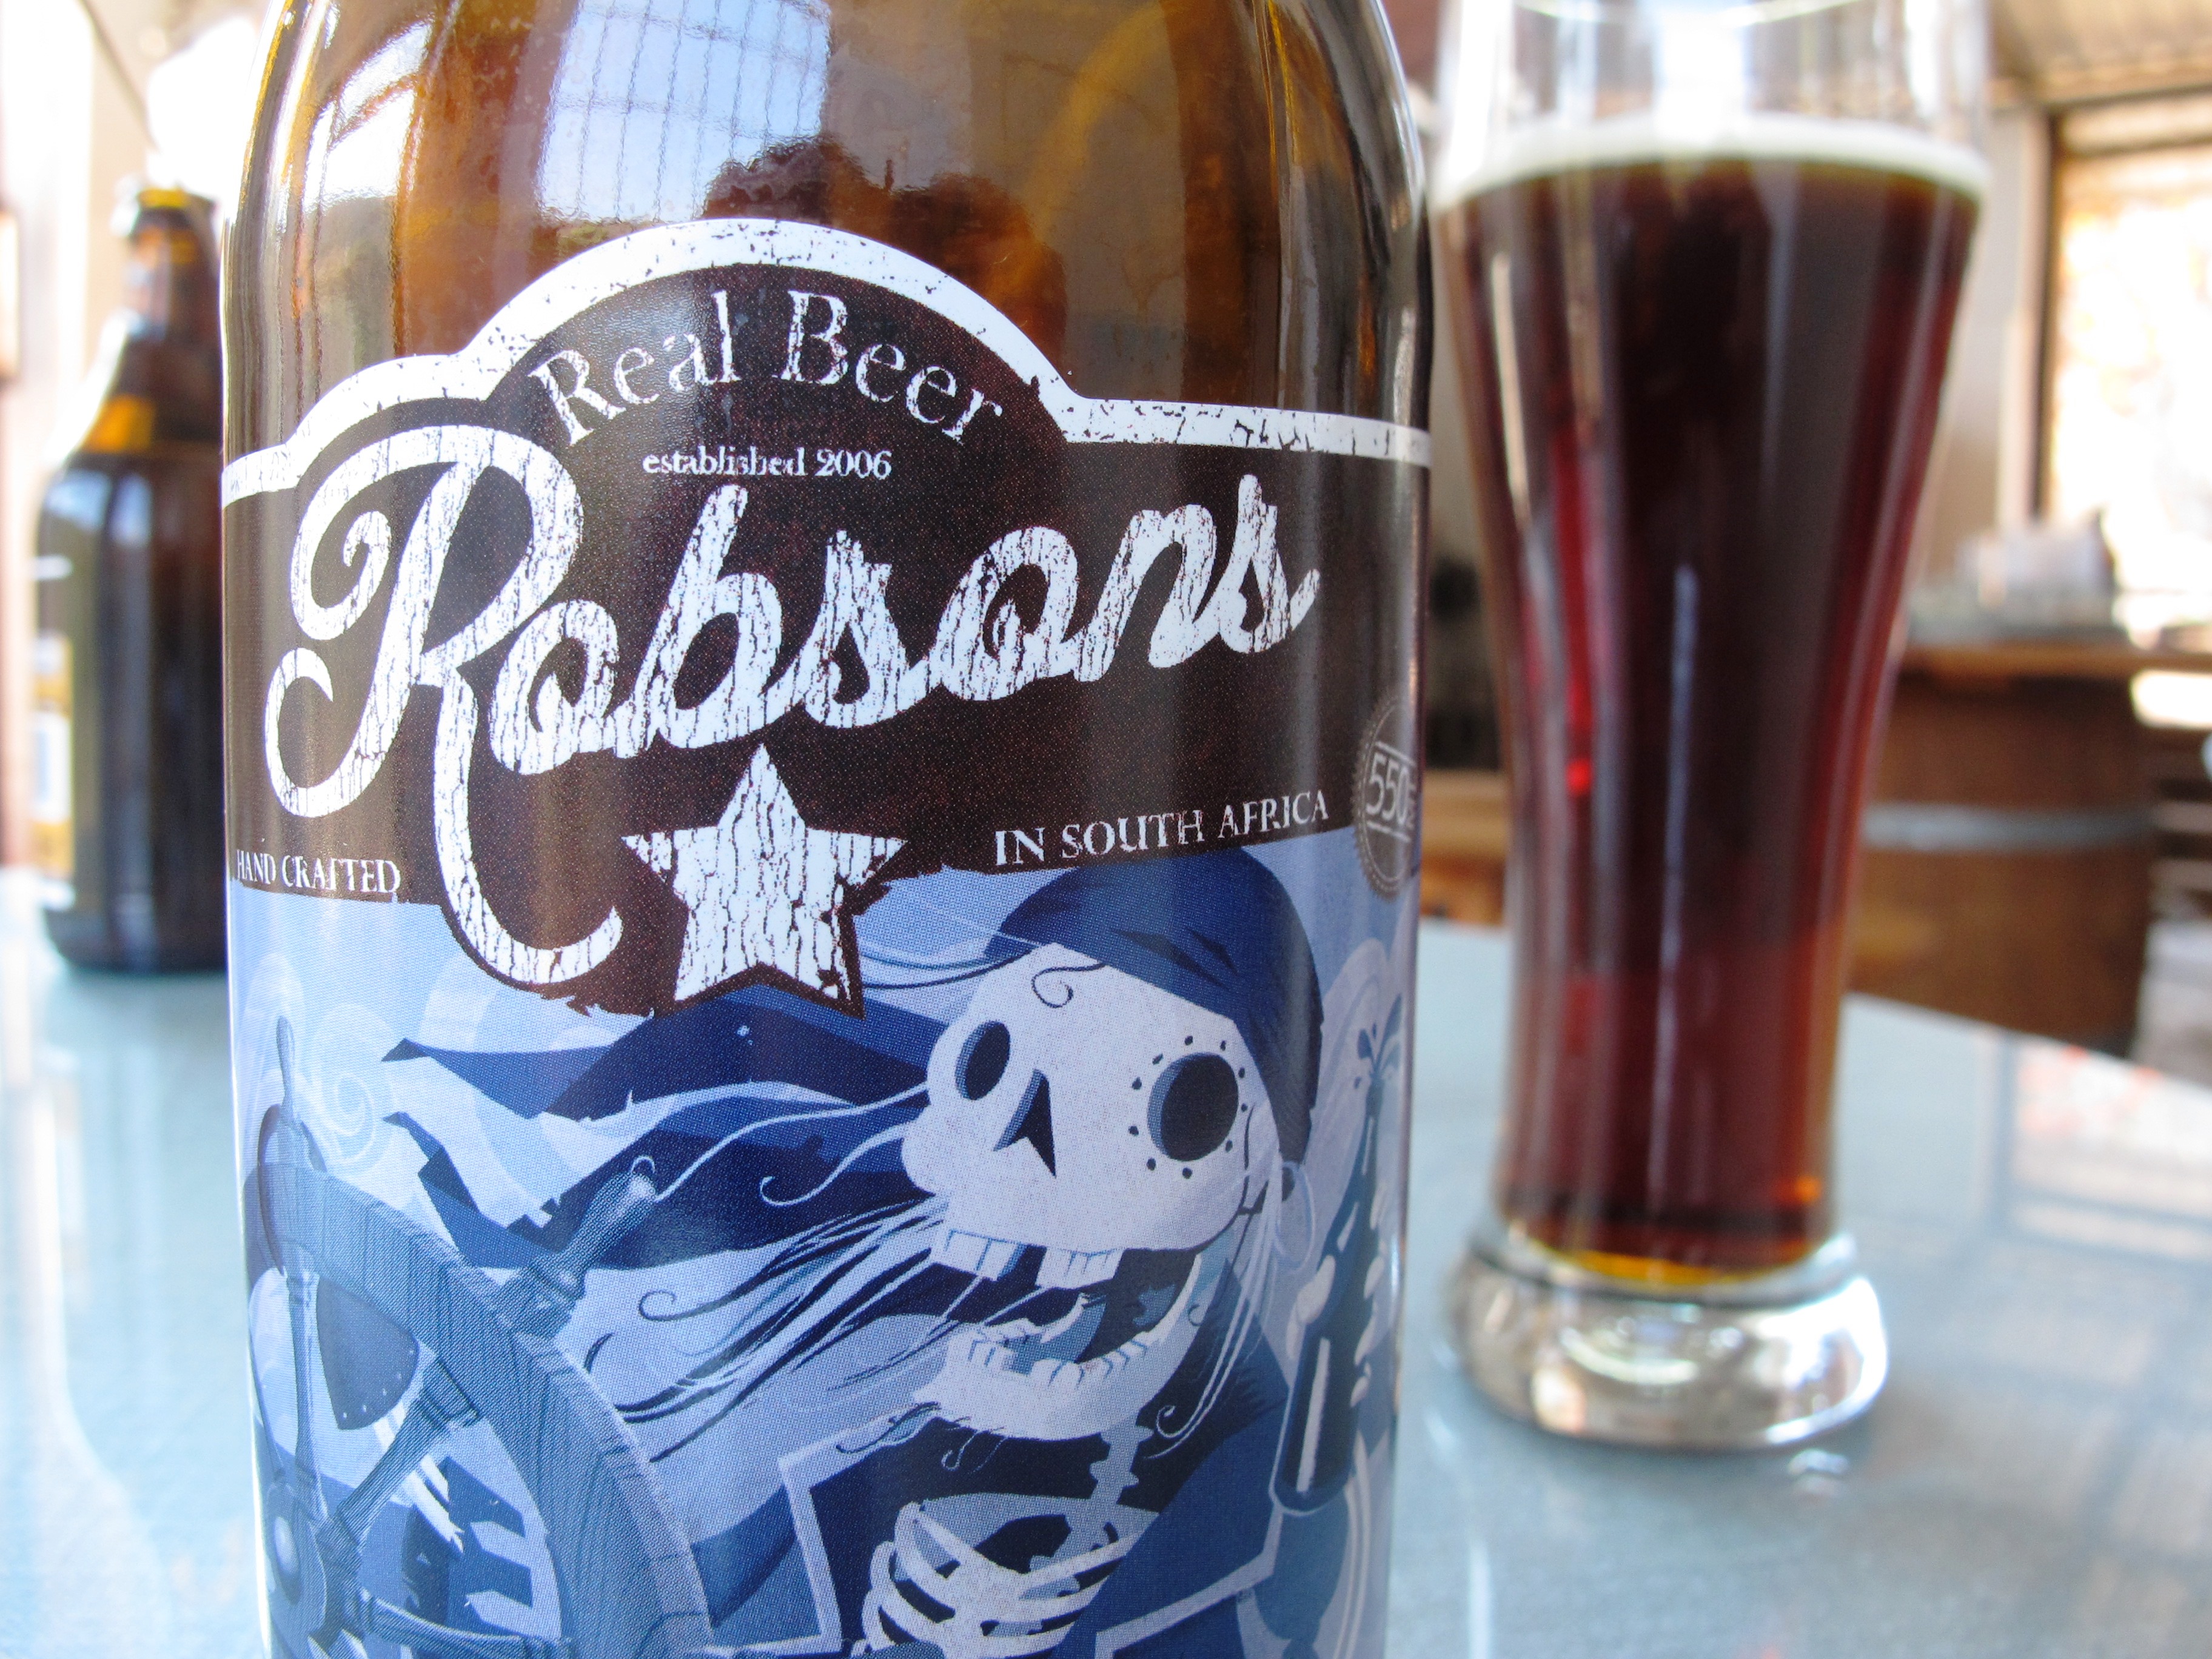 Beer Review: Robson’s West Coast Ale